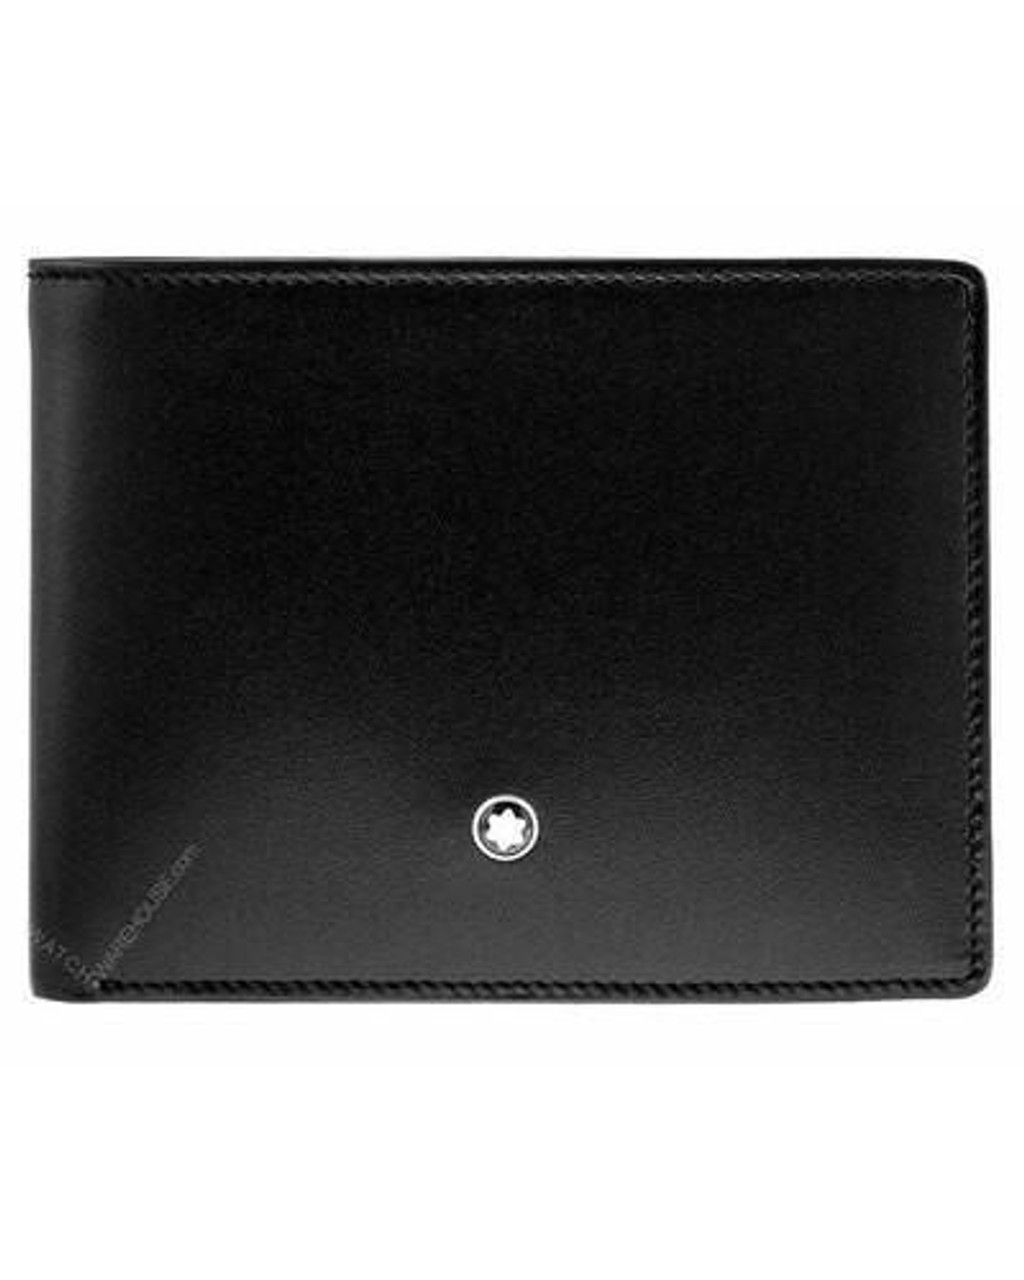 Montblanc Sartorial Black Leather Wallet with Money Clip 6 CC